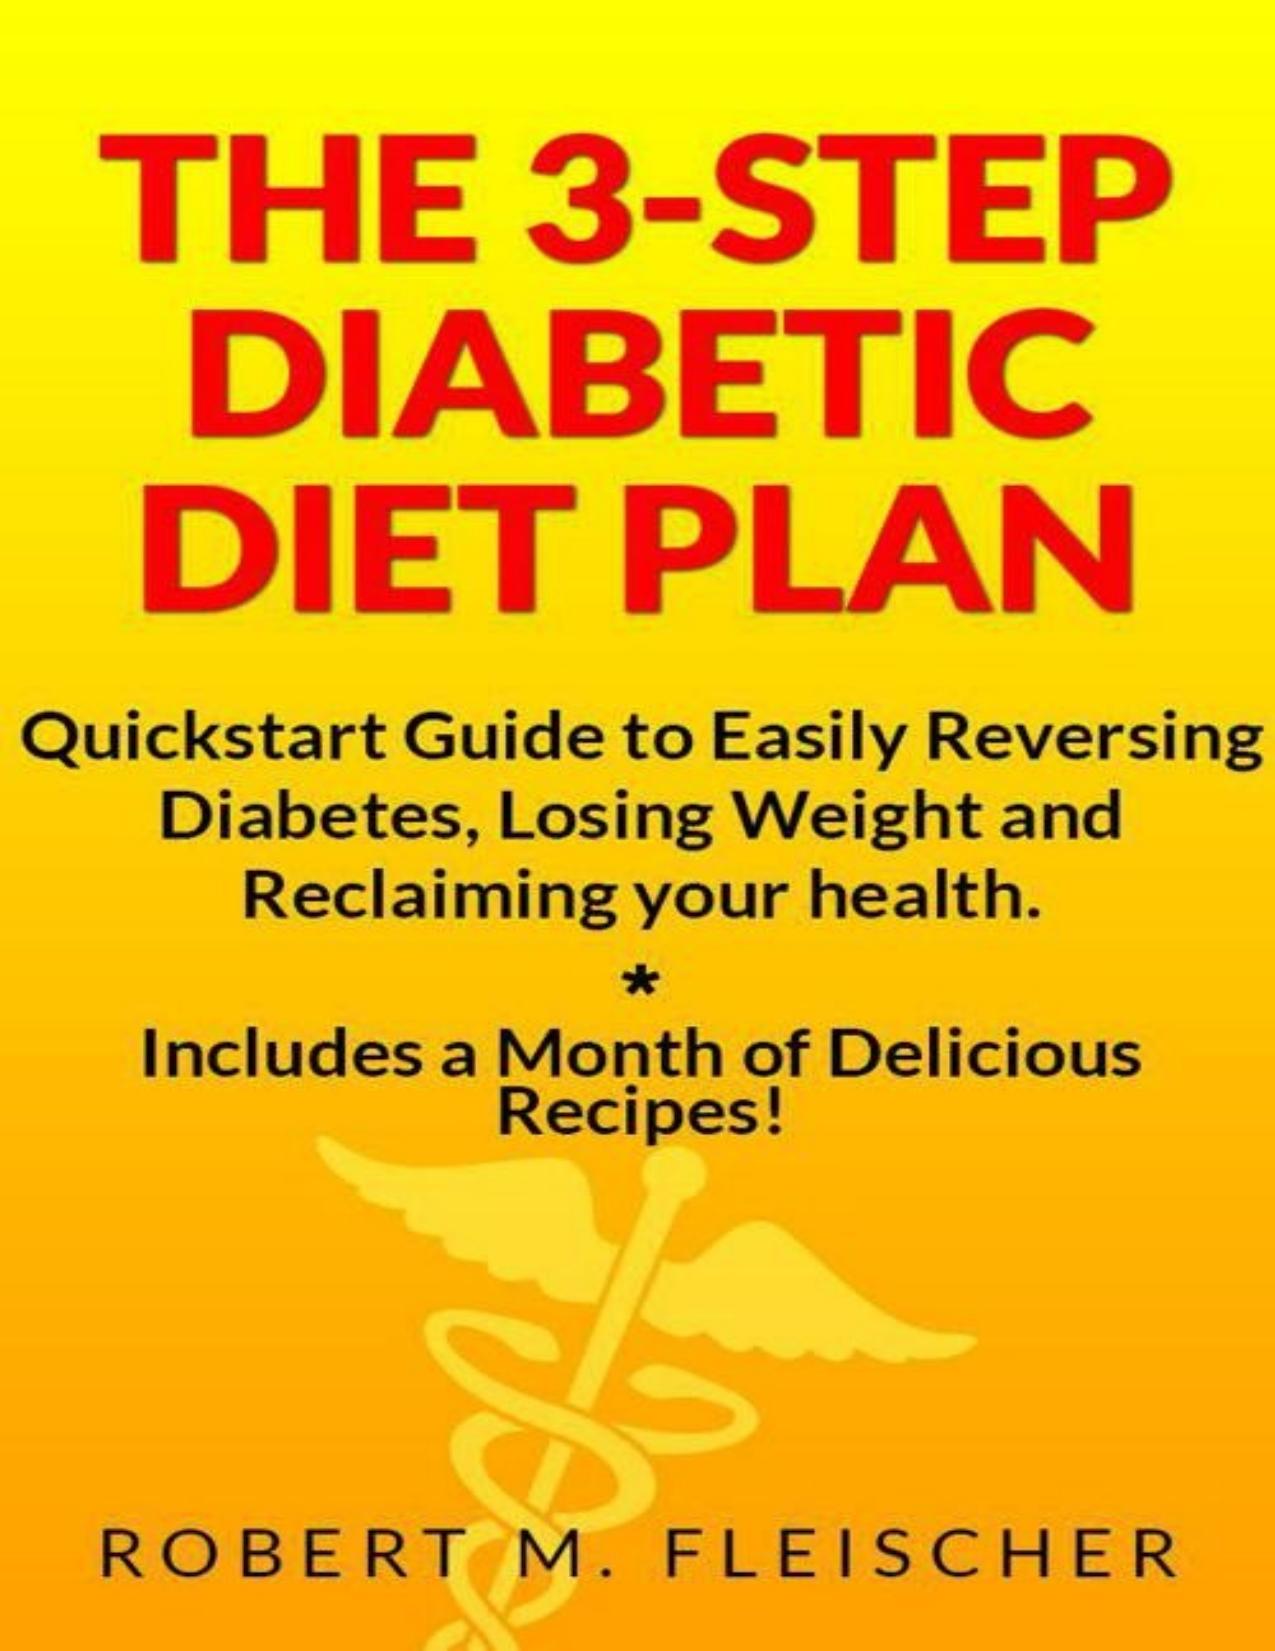 The 3-Step Diabetic Diet Plan: Quickstart Guide to Easily Reversing Diabetes, Losing Weight and Reclaiming your health - PDFDrive.com